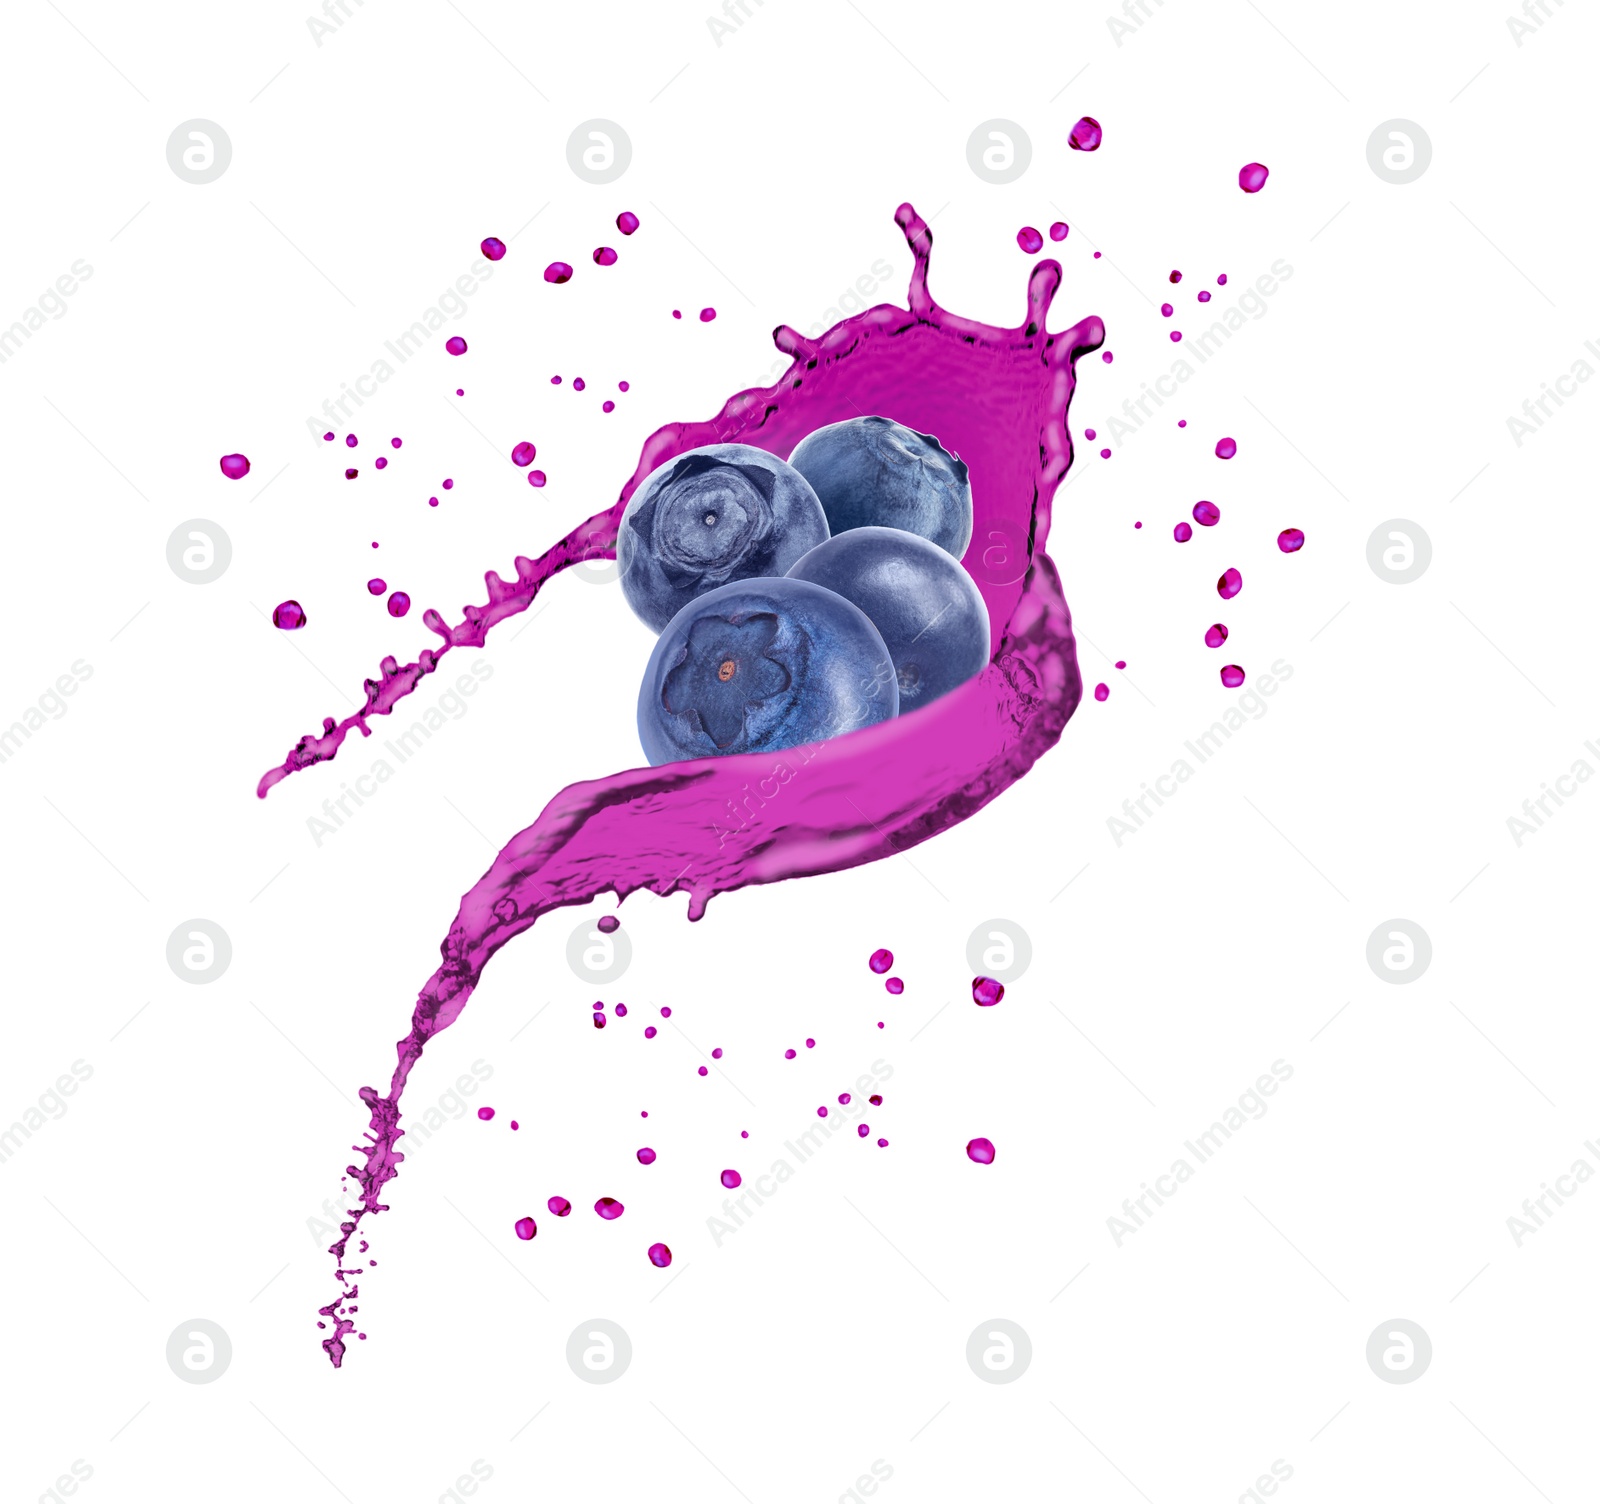 Image of Delicious ripe blueberries and splashes of juice on white background